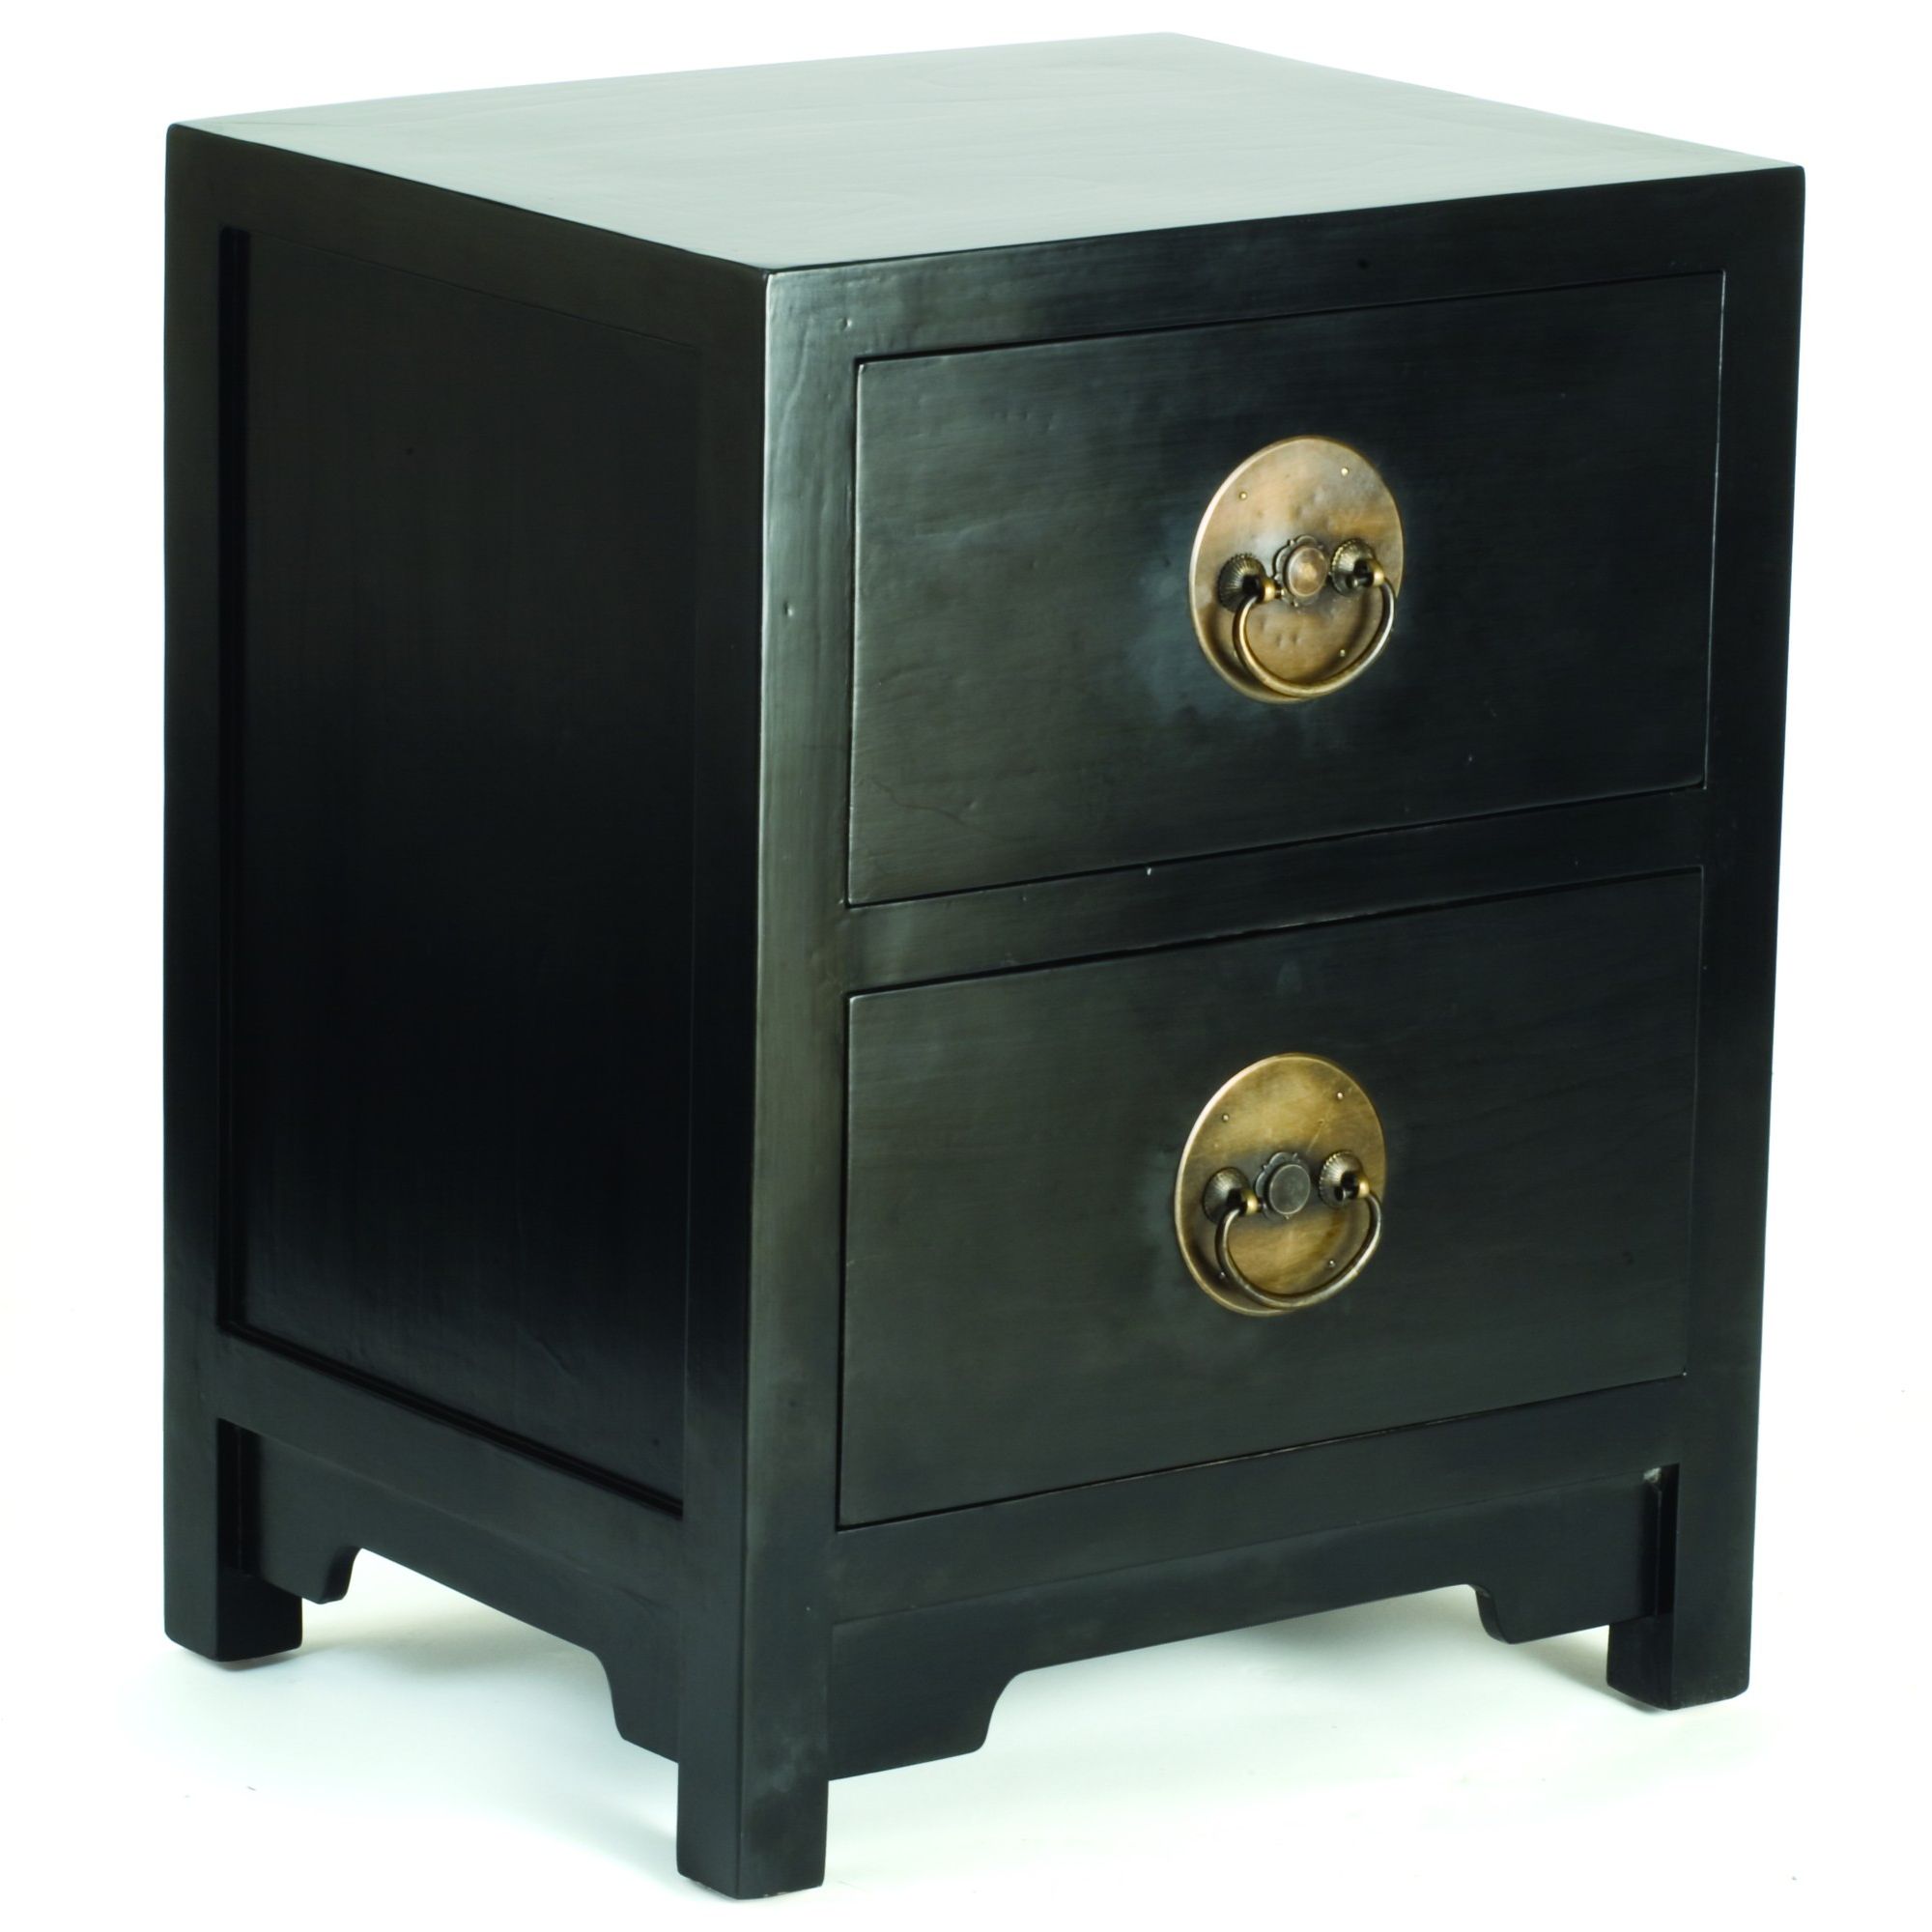 Shimu Chinese Classical Ming Two Drawer Chest - Black Lacquer at Tesco Direct